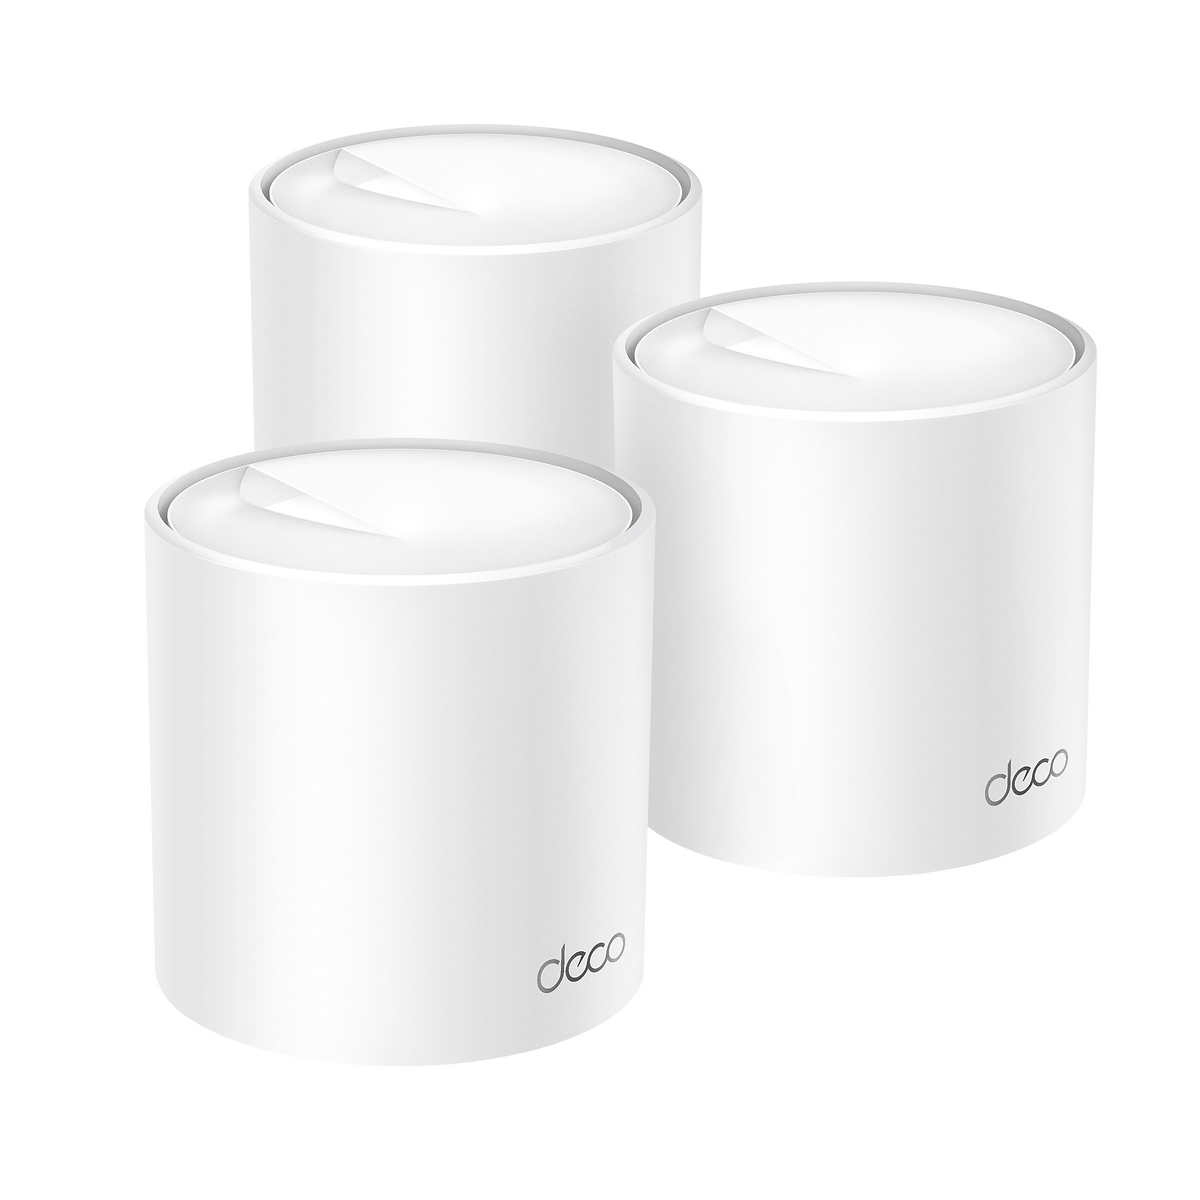 TP-Link Deco AX5000 Mesh Wifi, 3 Pack